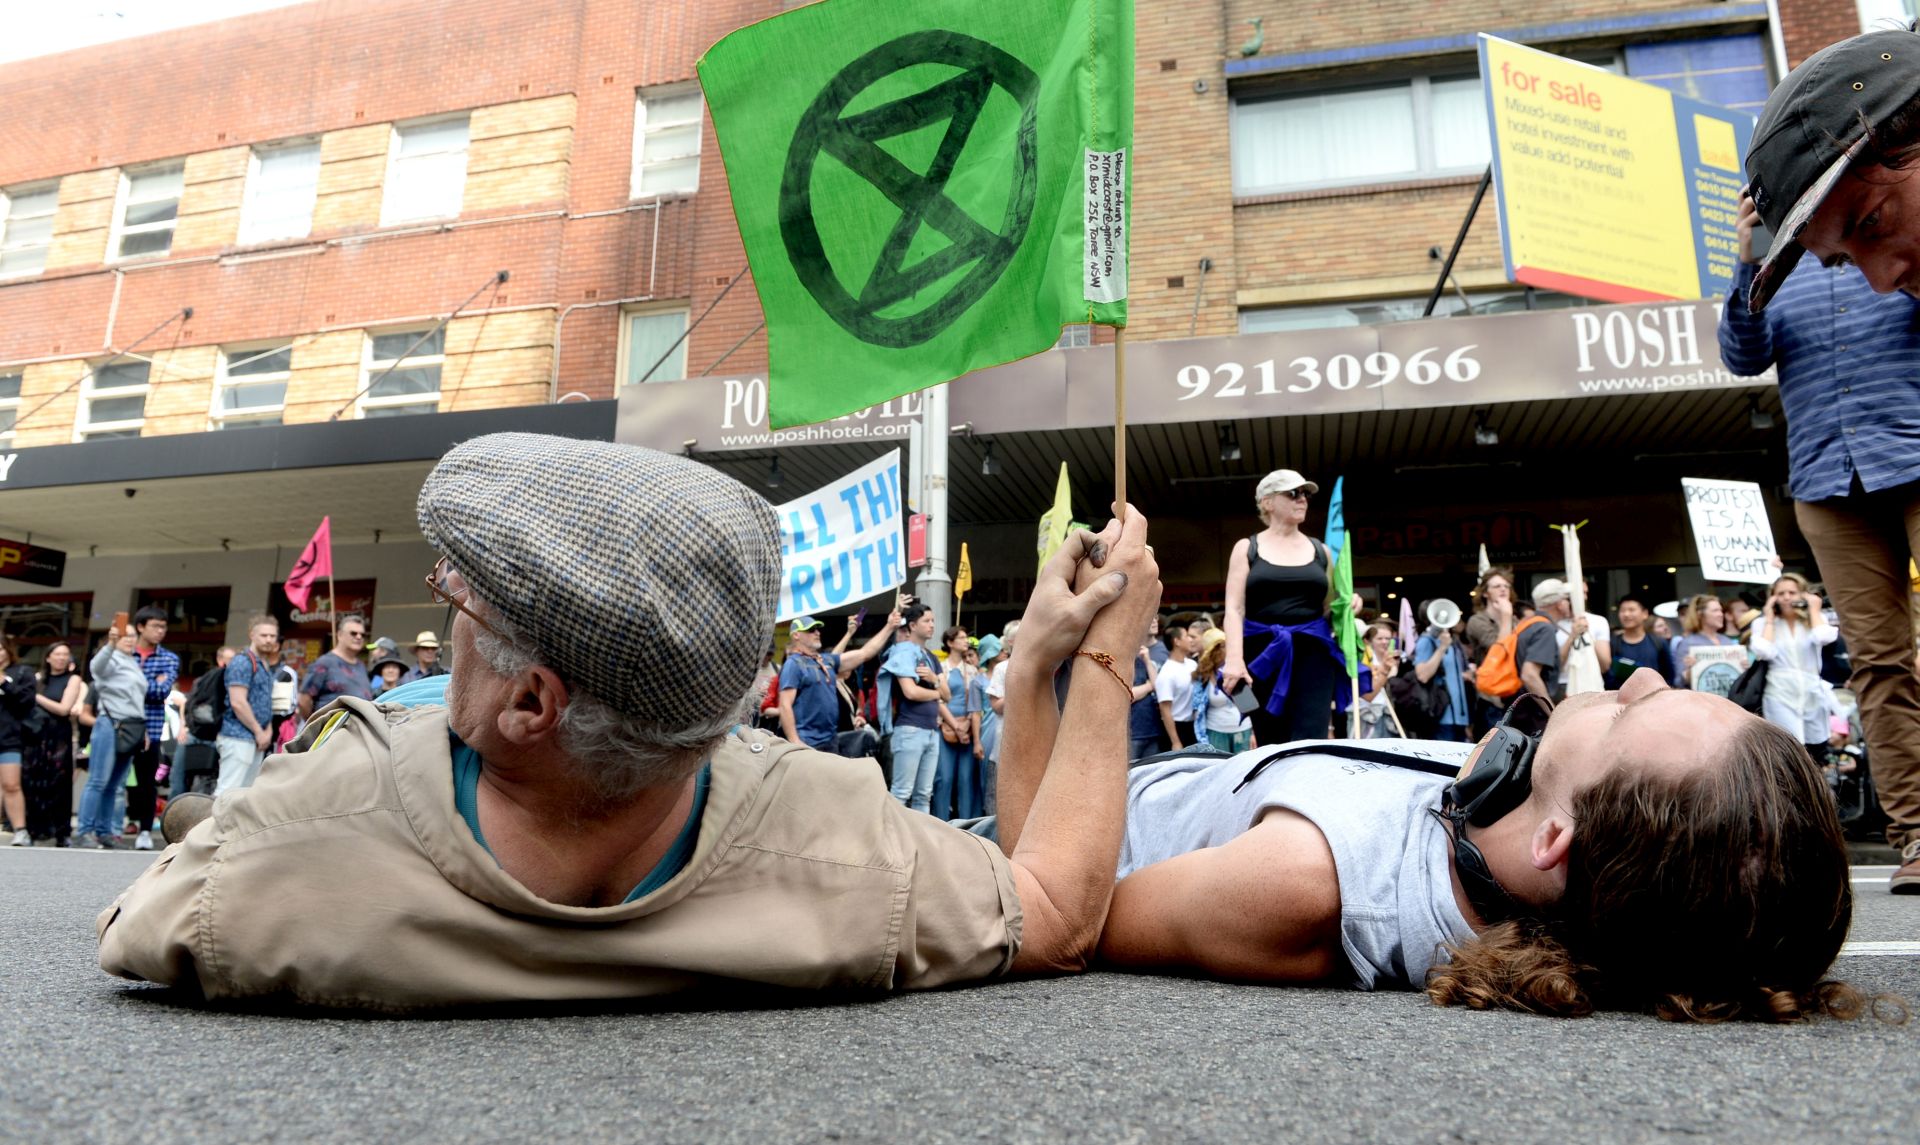 epa07902807 Protesters are removed and arrested during an Extinction Rebellion protest in Sydney, New South Wales, Australia, 07 October 2019. The Extinction Rebellion (XR) climate protests movement has planned a 'spring rebellion' from 07 to 13 October 2019, including marches aimed at blocking traffic.  EPA/JEREMY PIPER  AUSTRALIA AND NEW ZEALAND OUT